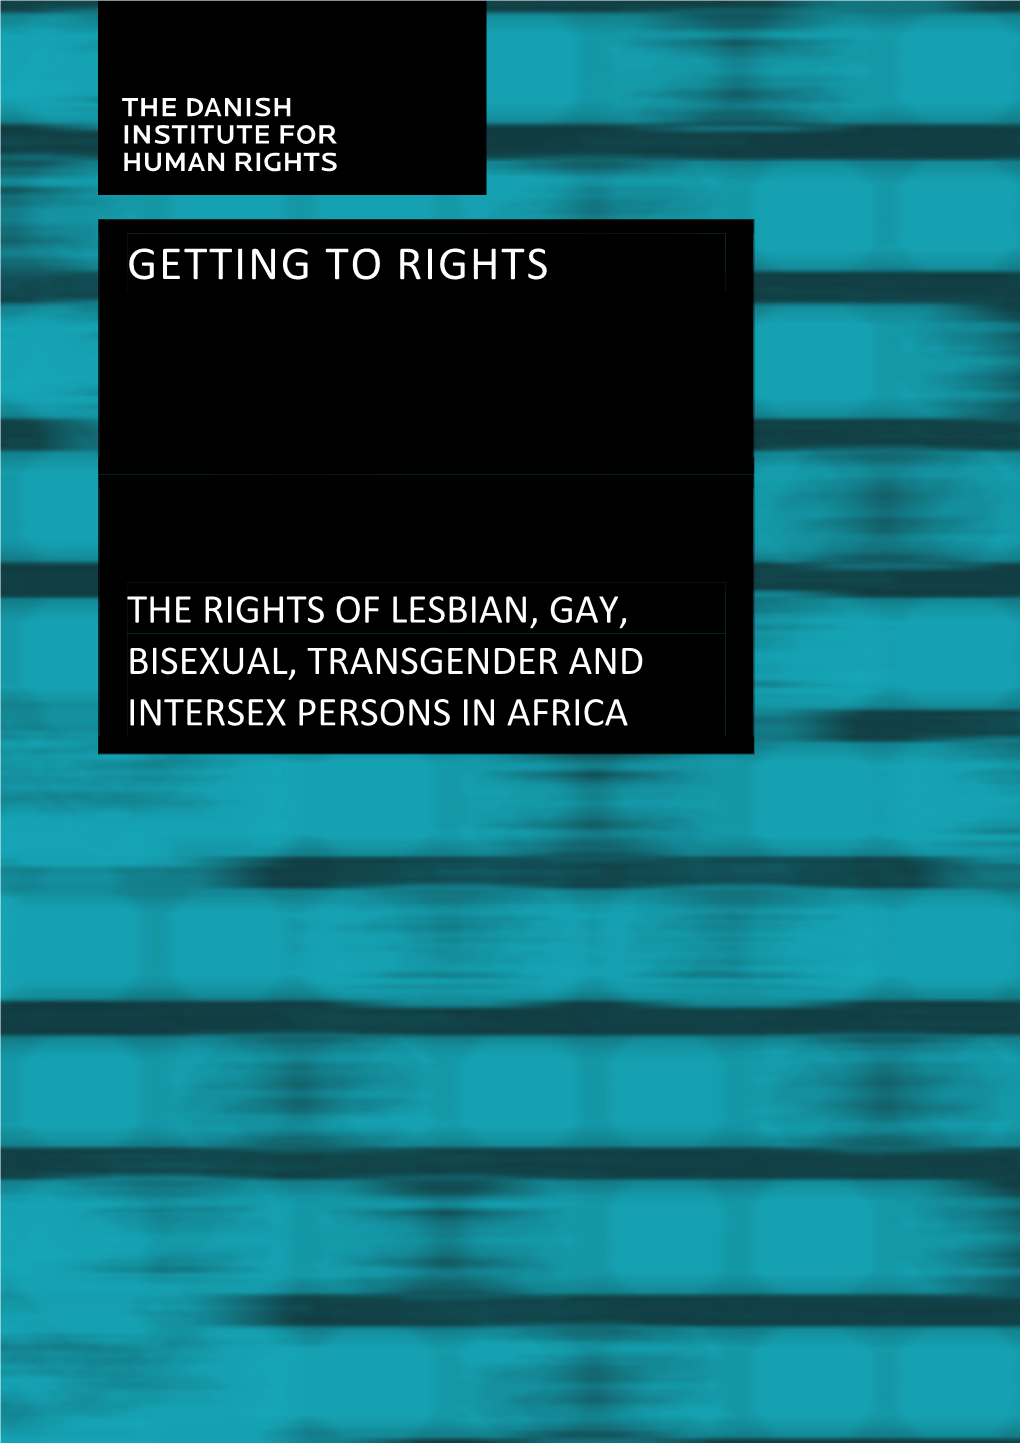 The Rights of Lesbian, Gay, Bisexual, Transgender and Intersex Persons in Africa